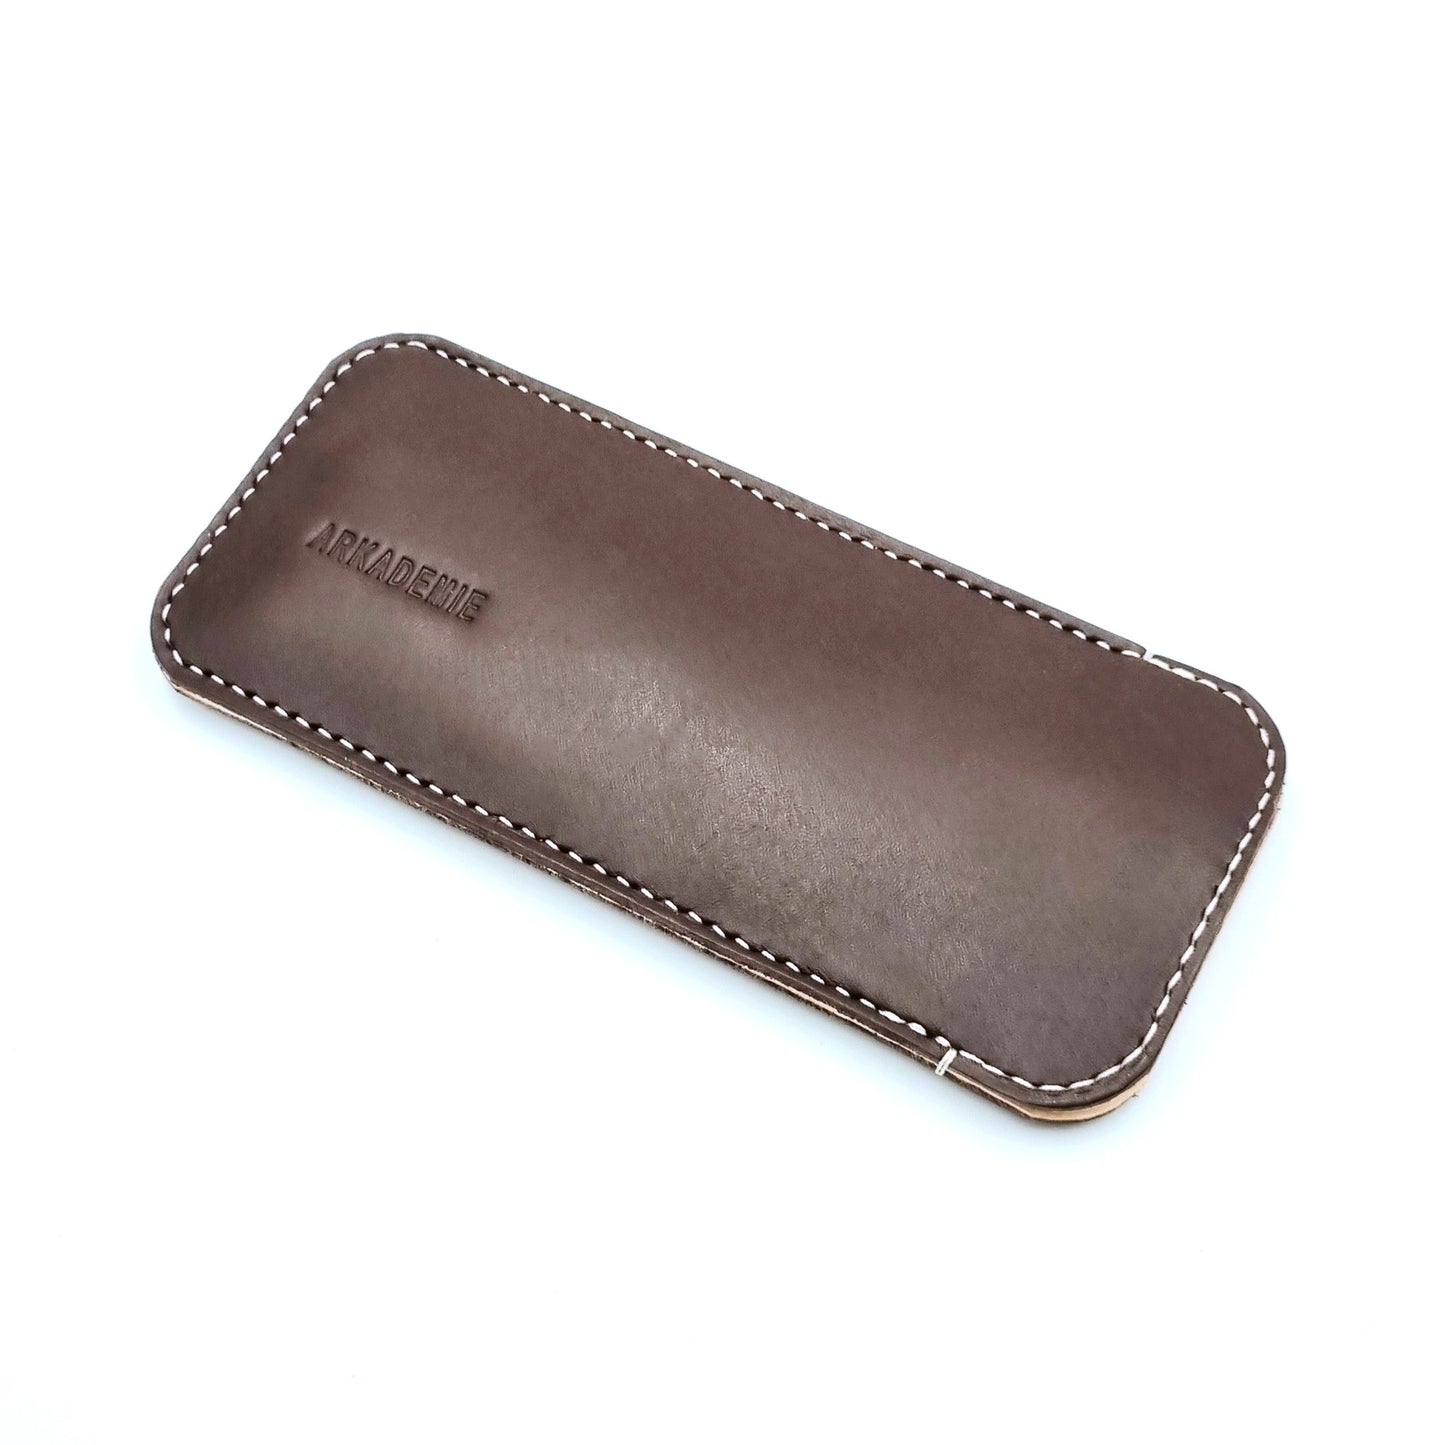 ELI 2 Leather Spectacles Case